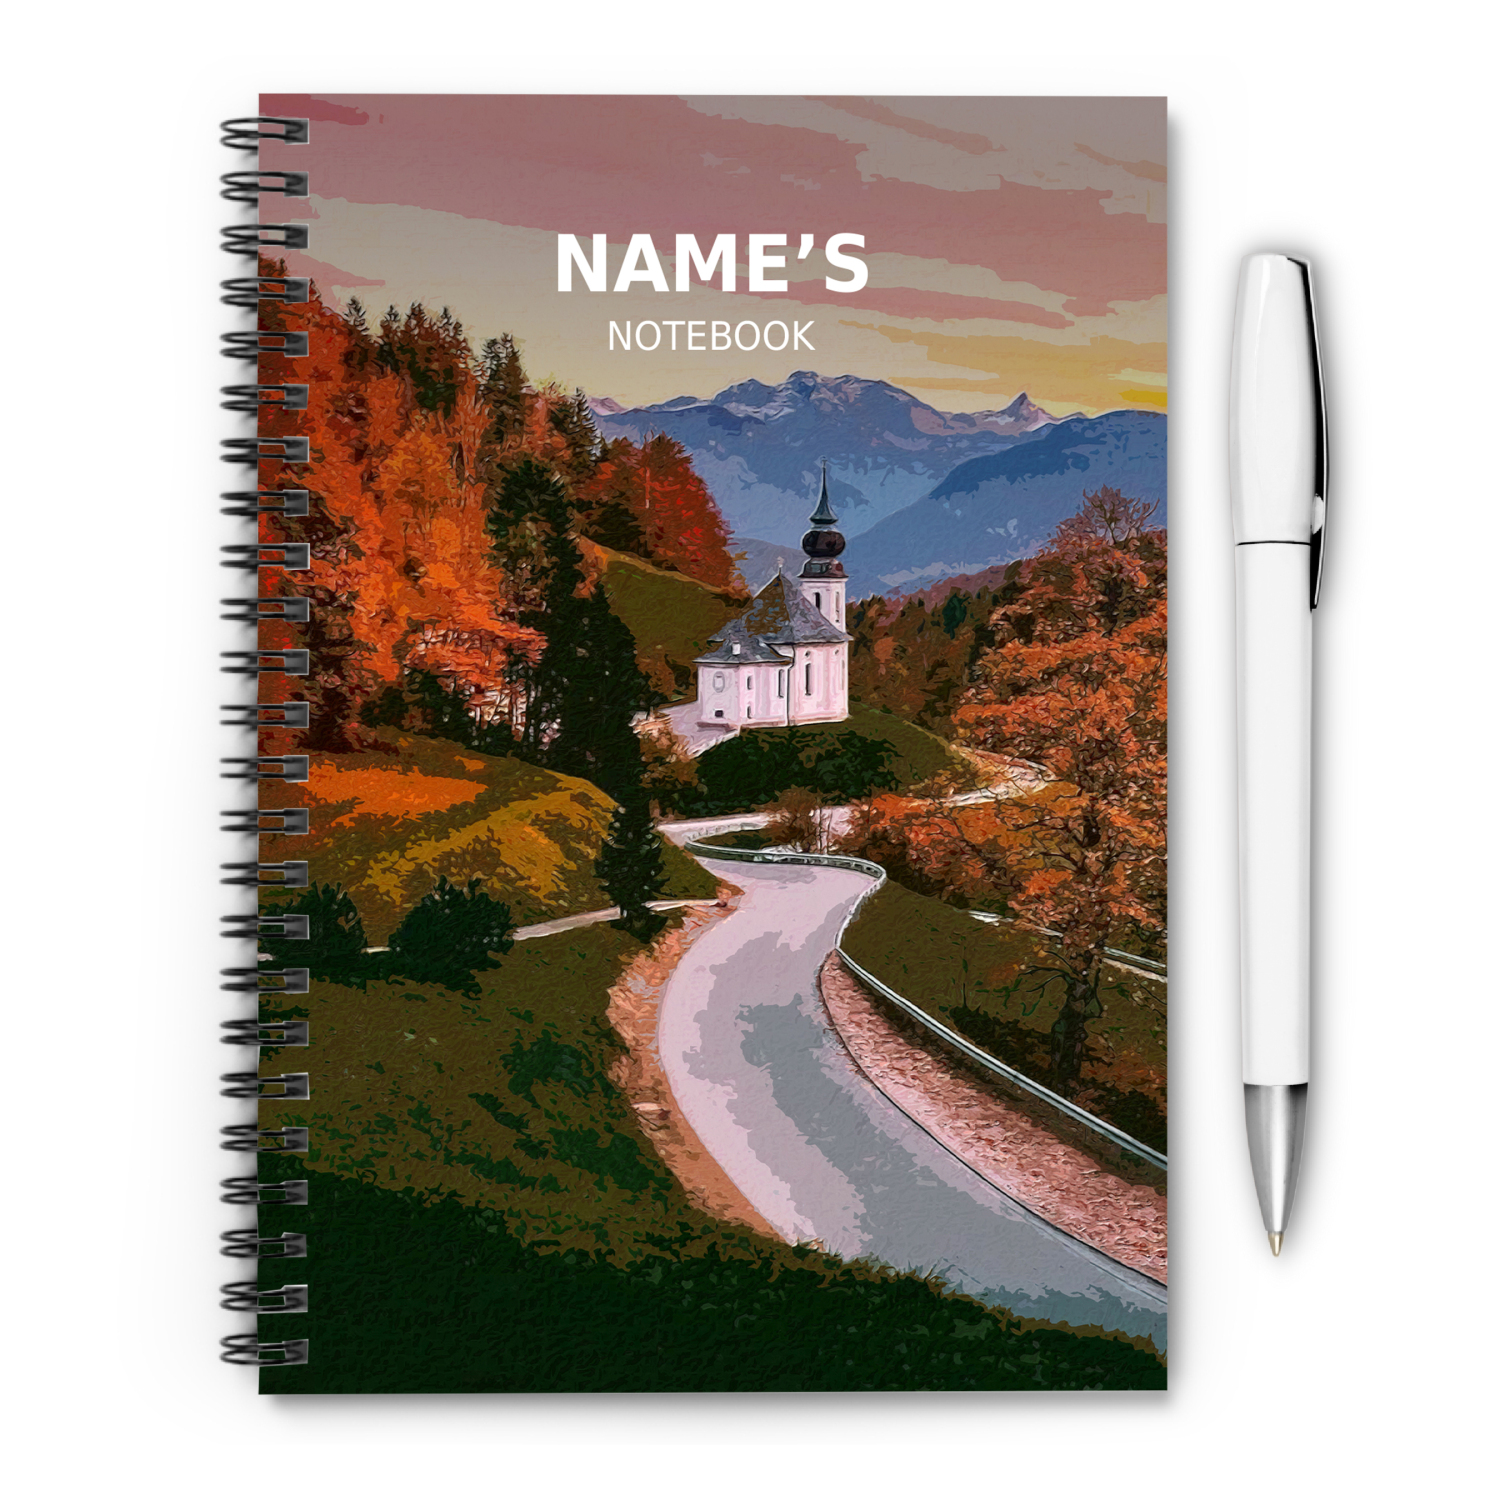 Bavaria - Germany - A5 Notebook - Single Note Book